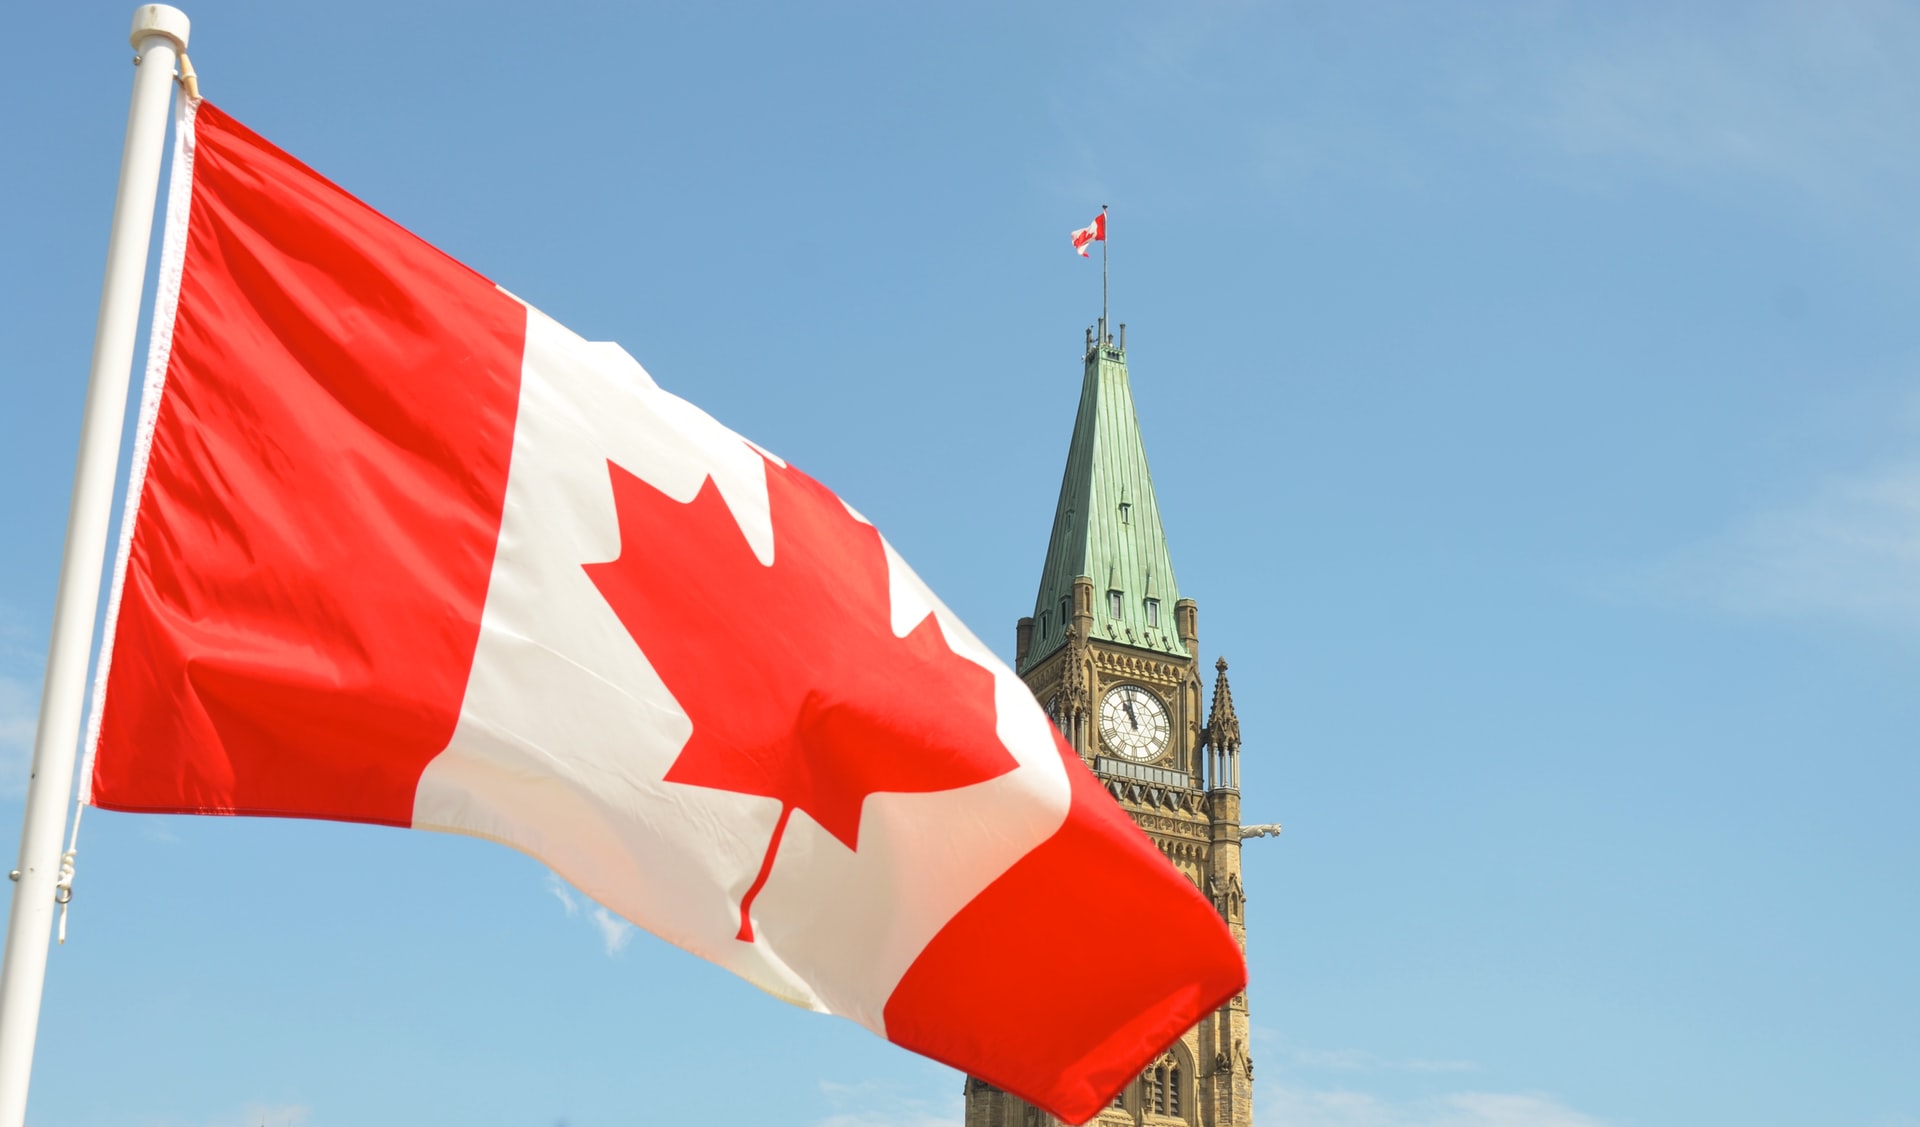 Gaming and Gambling Regulation in Canada - Outlook for 2023